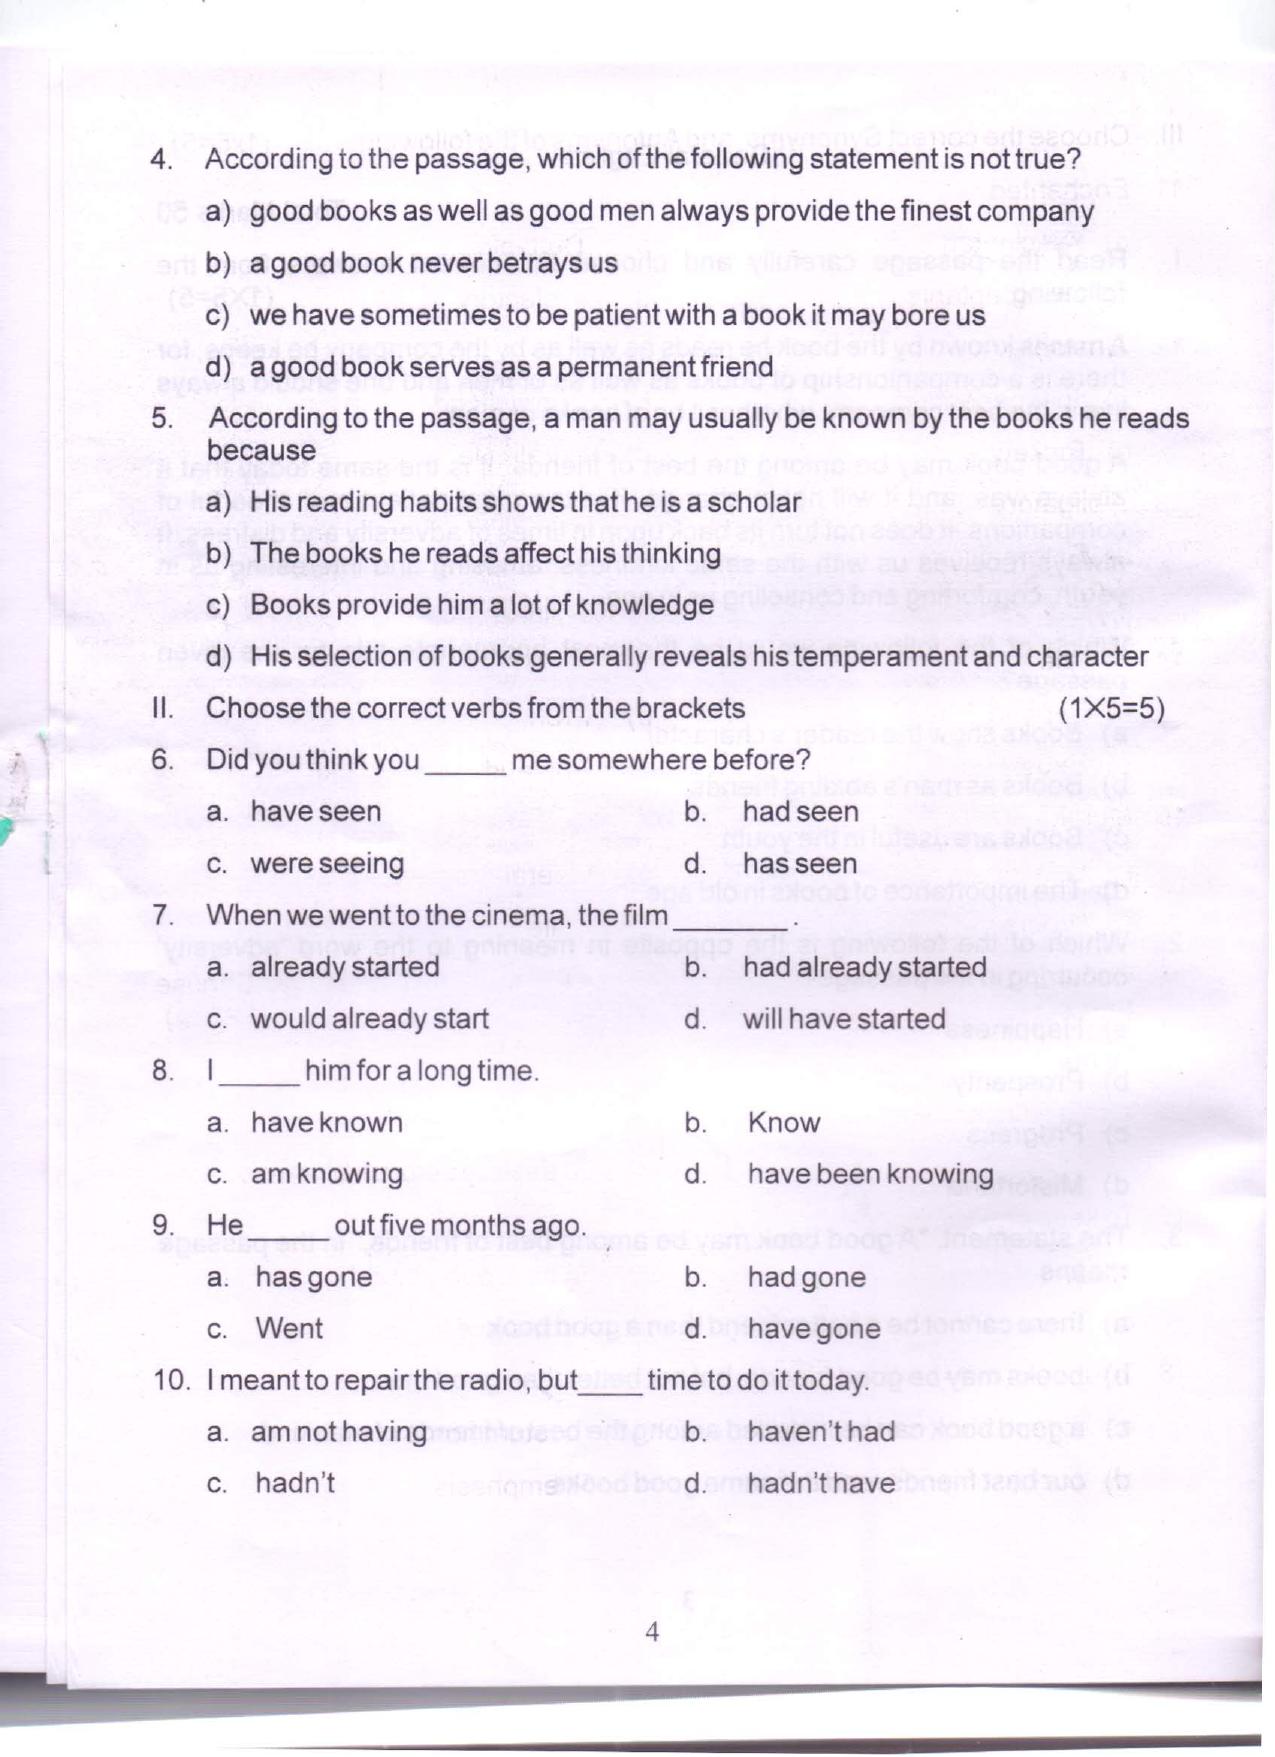 PDF Download Of SPSC MPHW General English & General Knowledge Previous Papers - Page 3